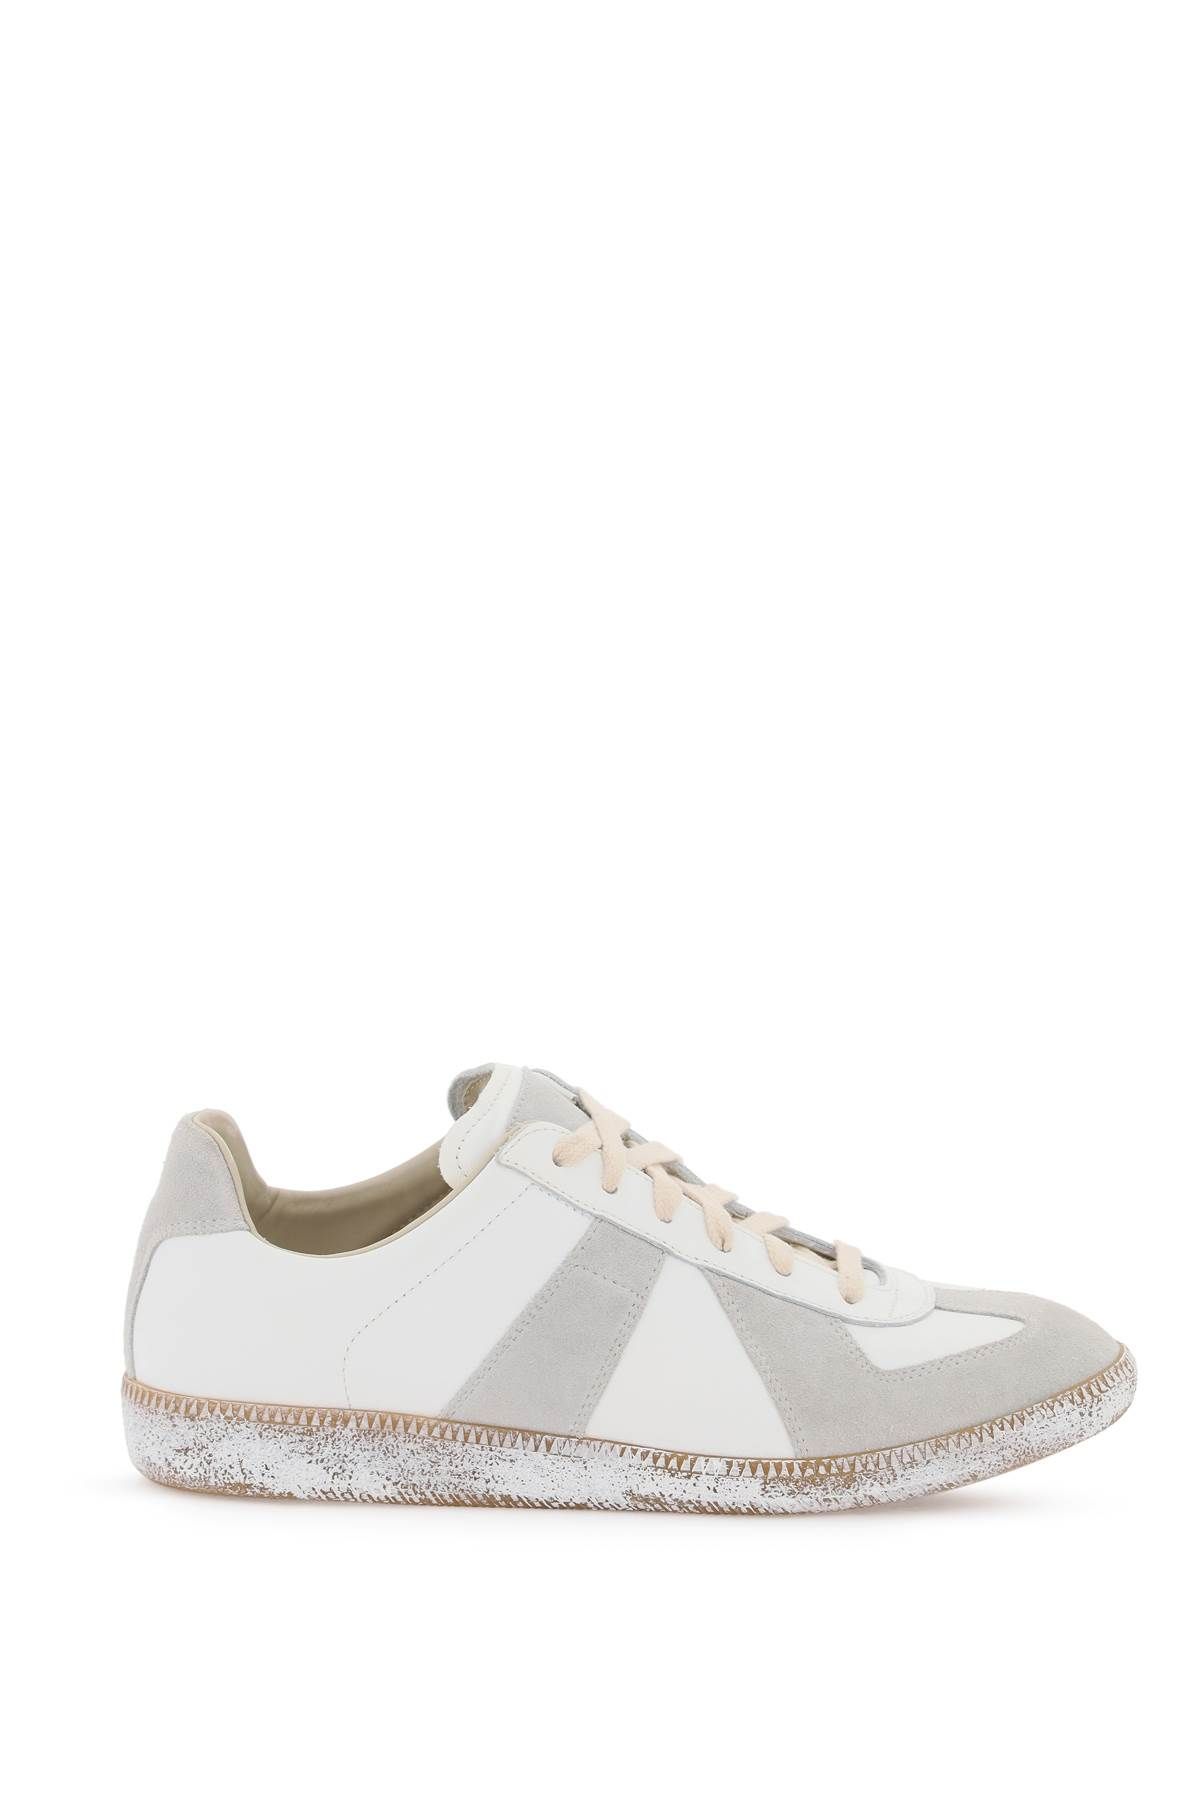 Shop Maison Margiela Vintage Nappa And Suede Replica Sneakers In In White,grey